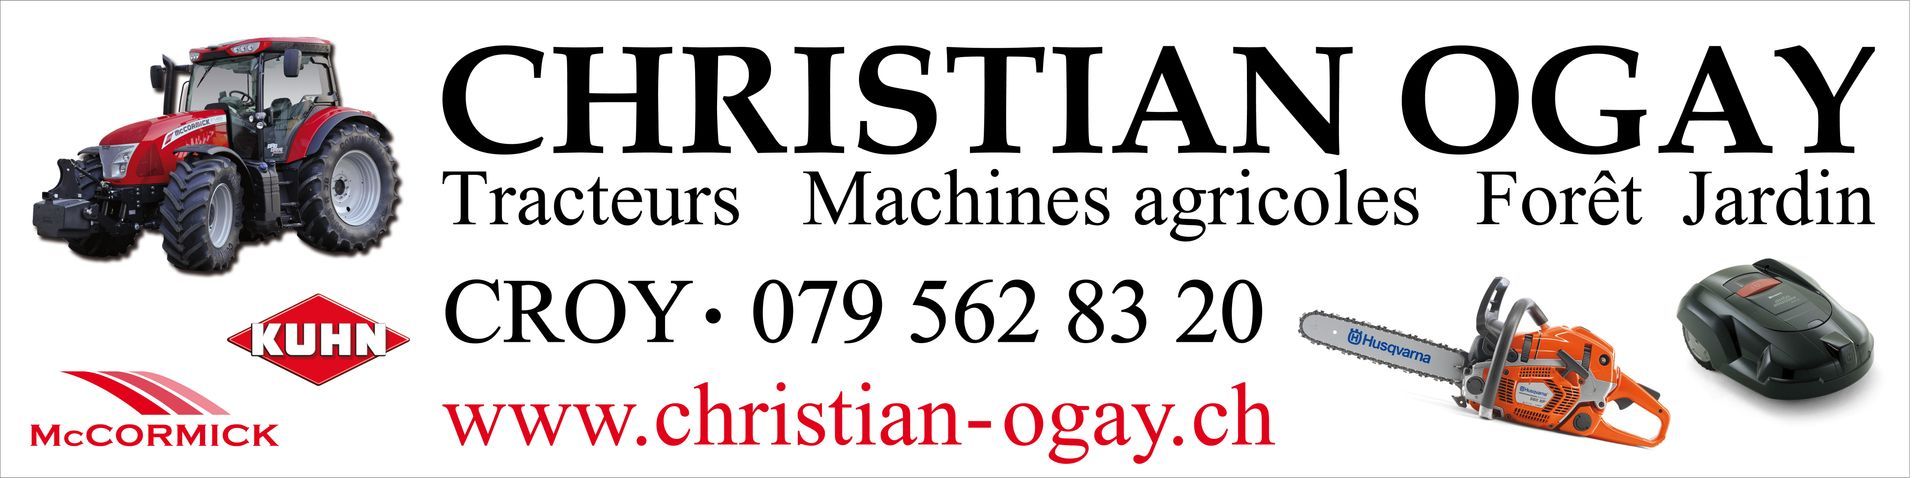 Christian Ogay tracteurs machines agricoles